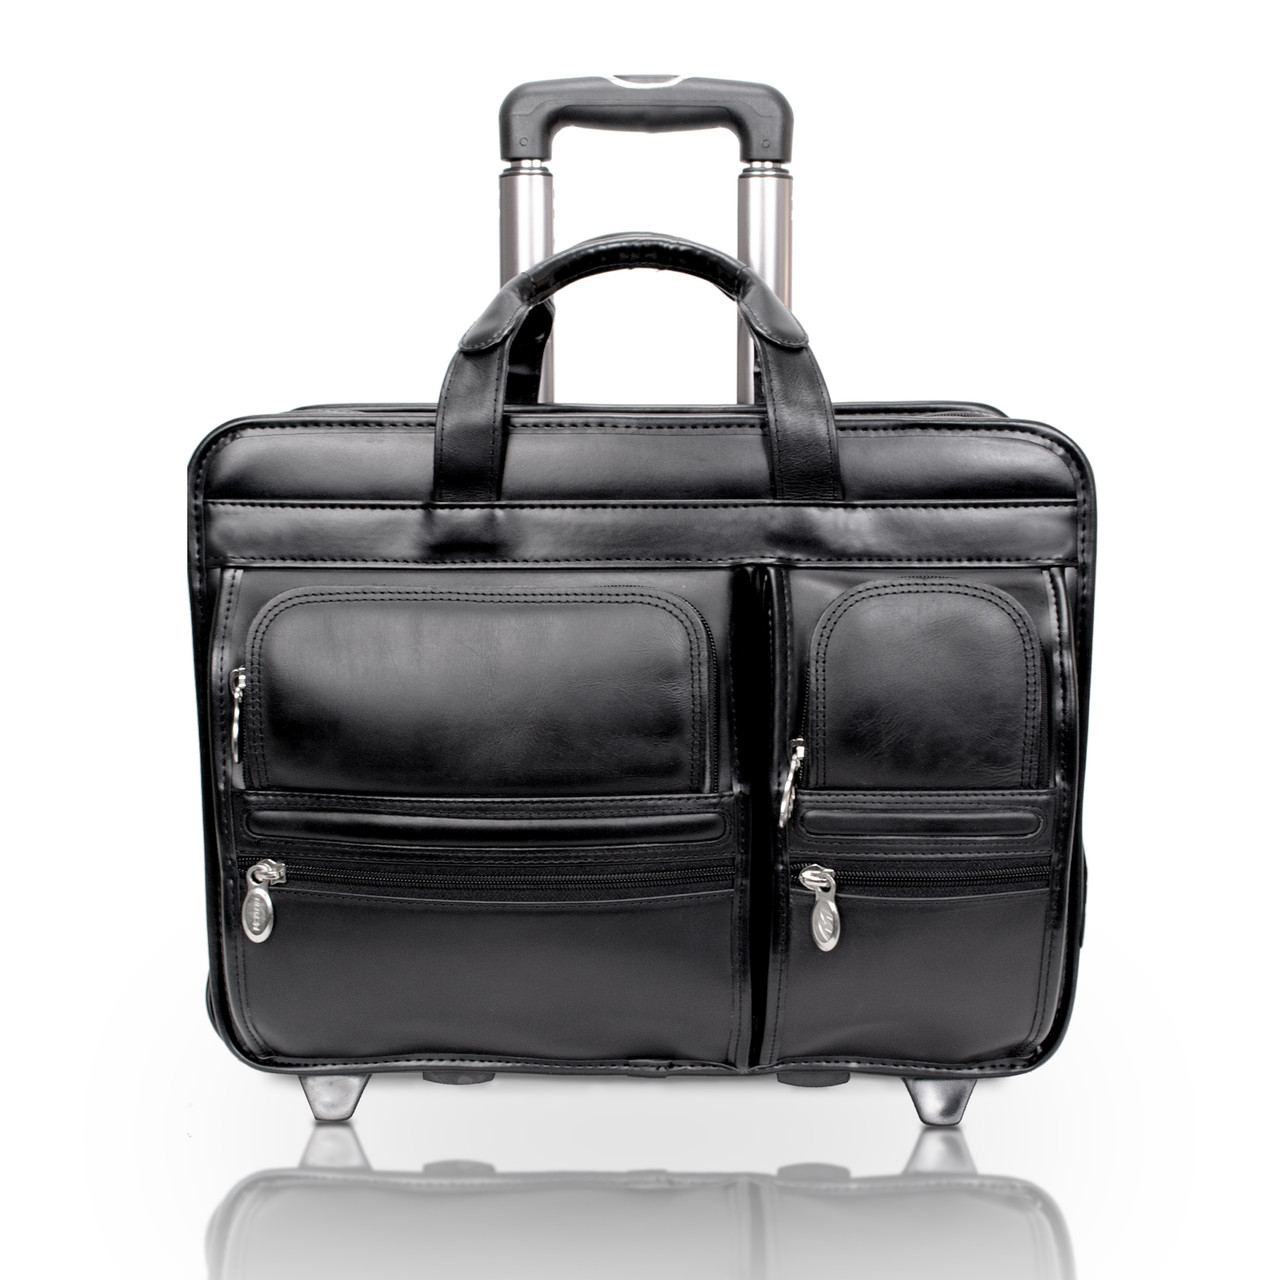  Laptop Briefcases - Rolling & Wheeled / Laptop